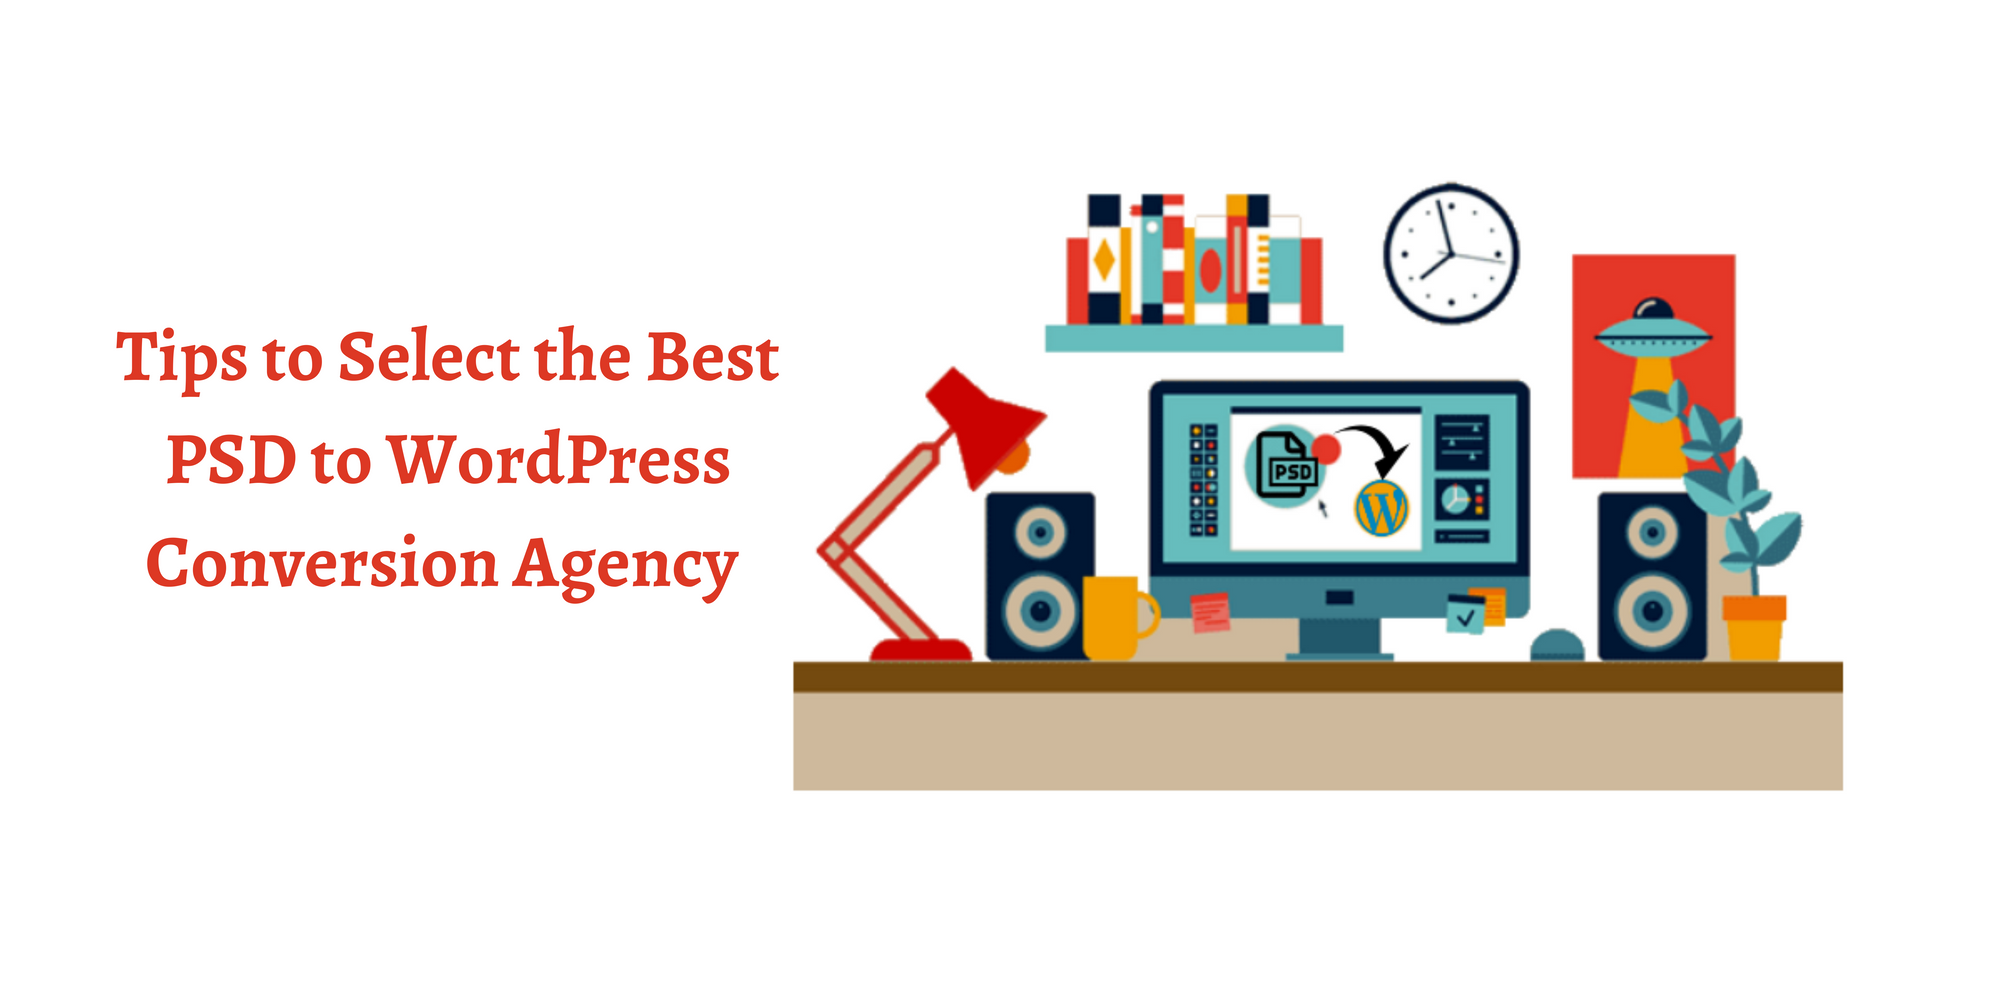 Tips to Select the Best PSD to WordPress Conversion Agency